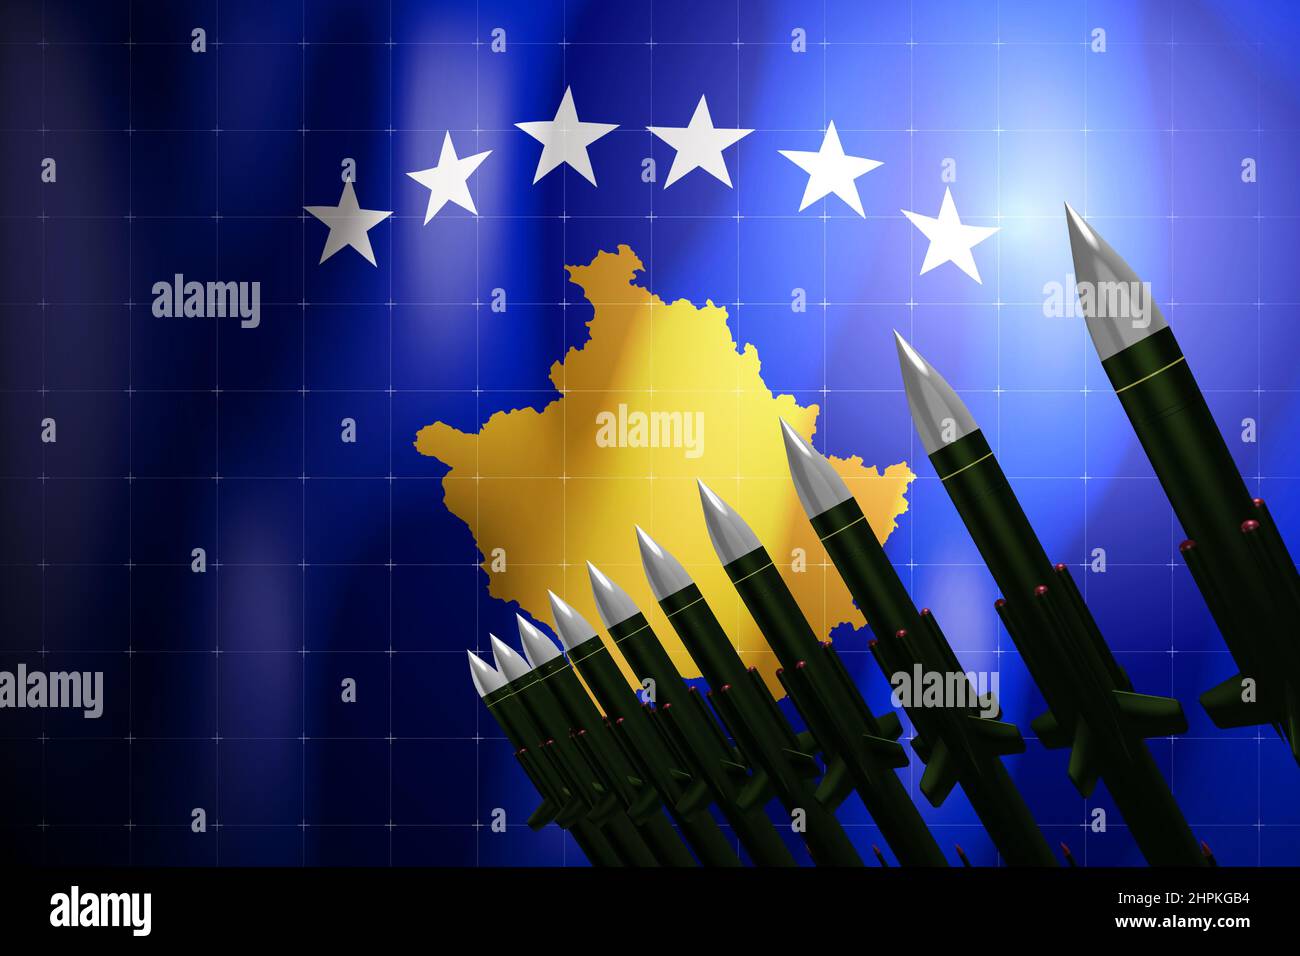 Cruise missiles, flag of Kosovo in background - defense concept - 3D illustration Stock Photo